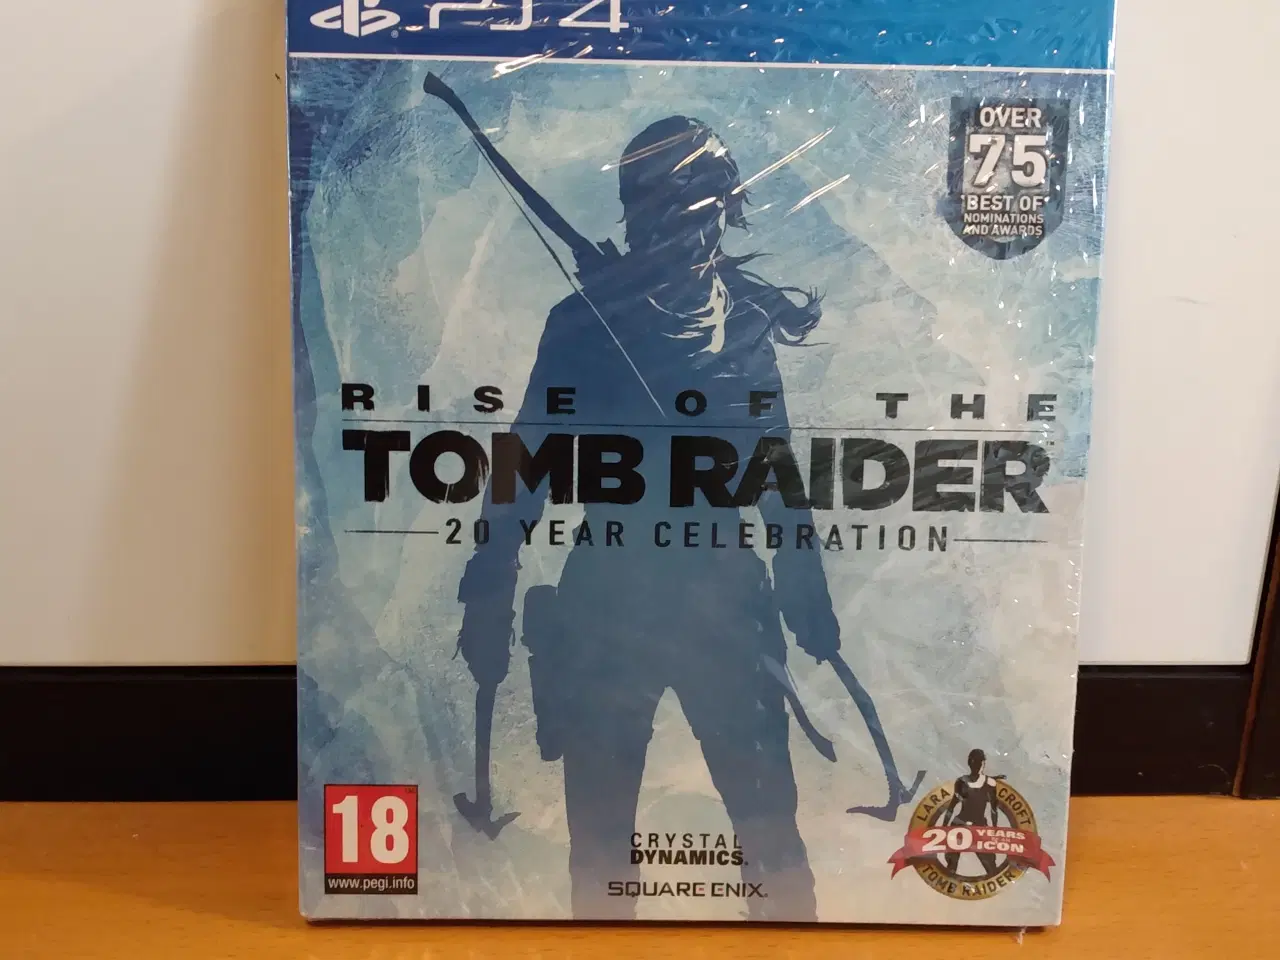 Billede 1 - Rise of the Tomb Raider (PS4 spil)